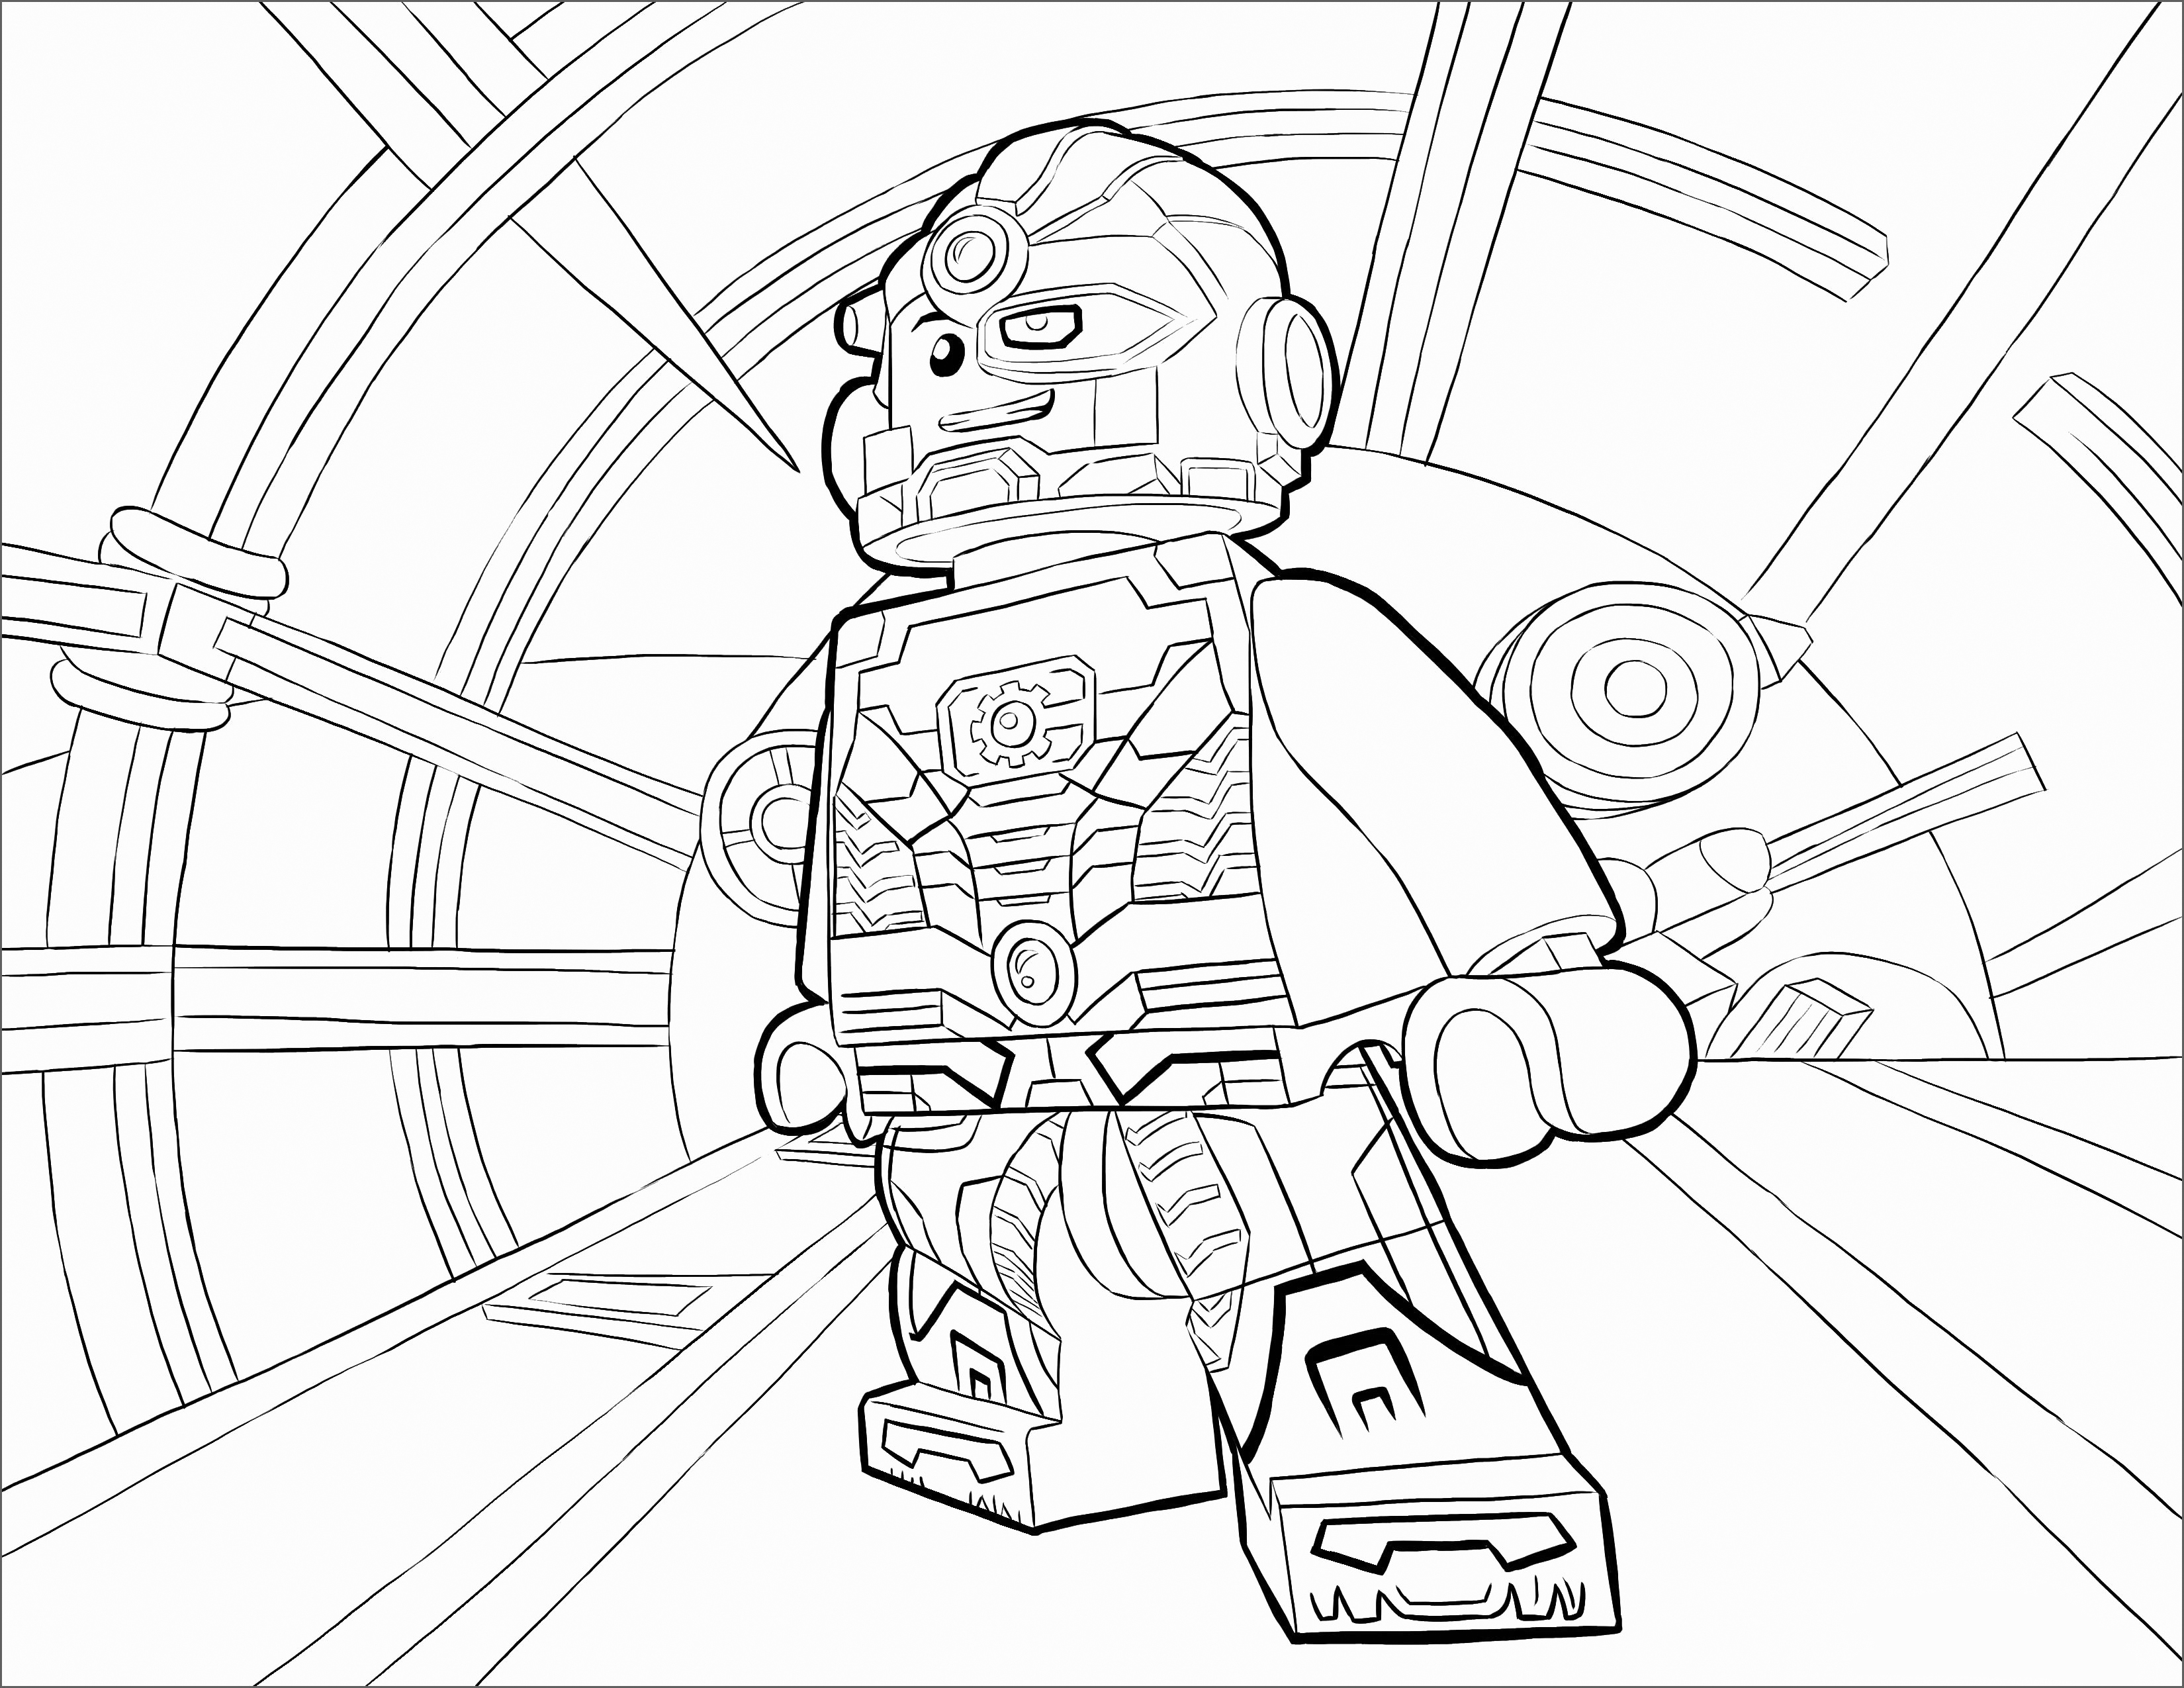 lego marvel superheroes coloring pages